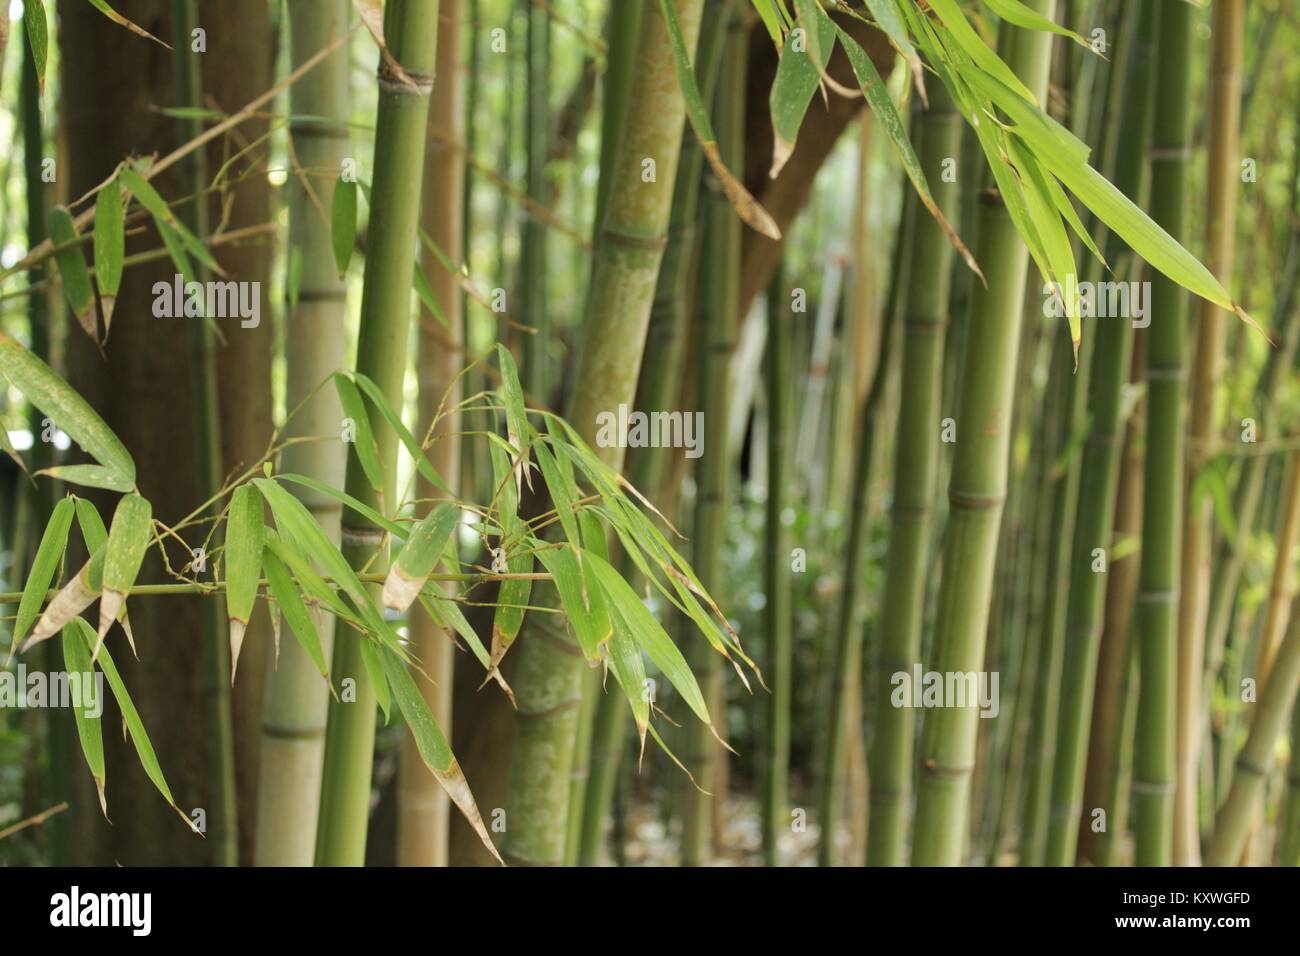 Forest of bamboo canes in the garden Stock Photo - Alamy